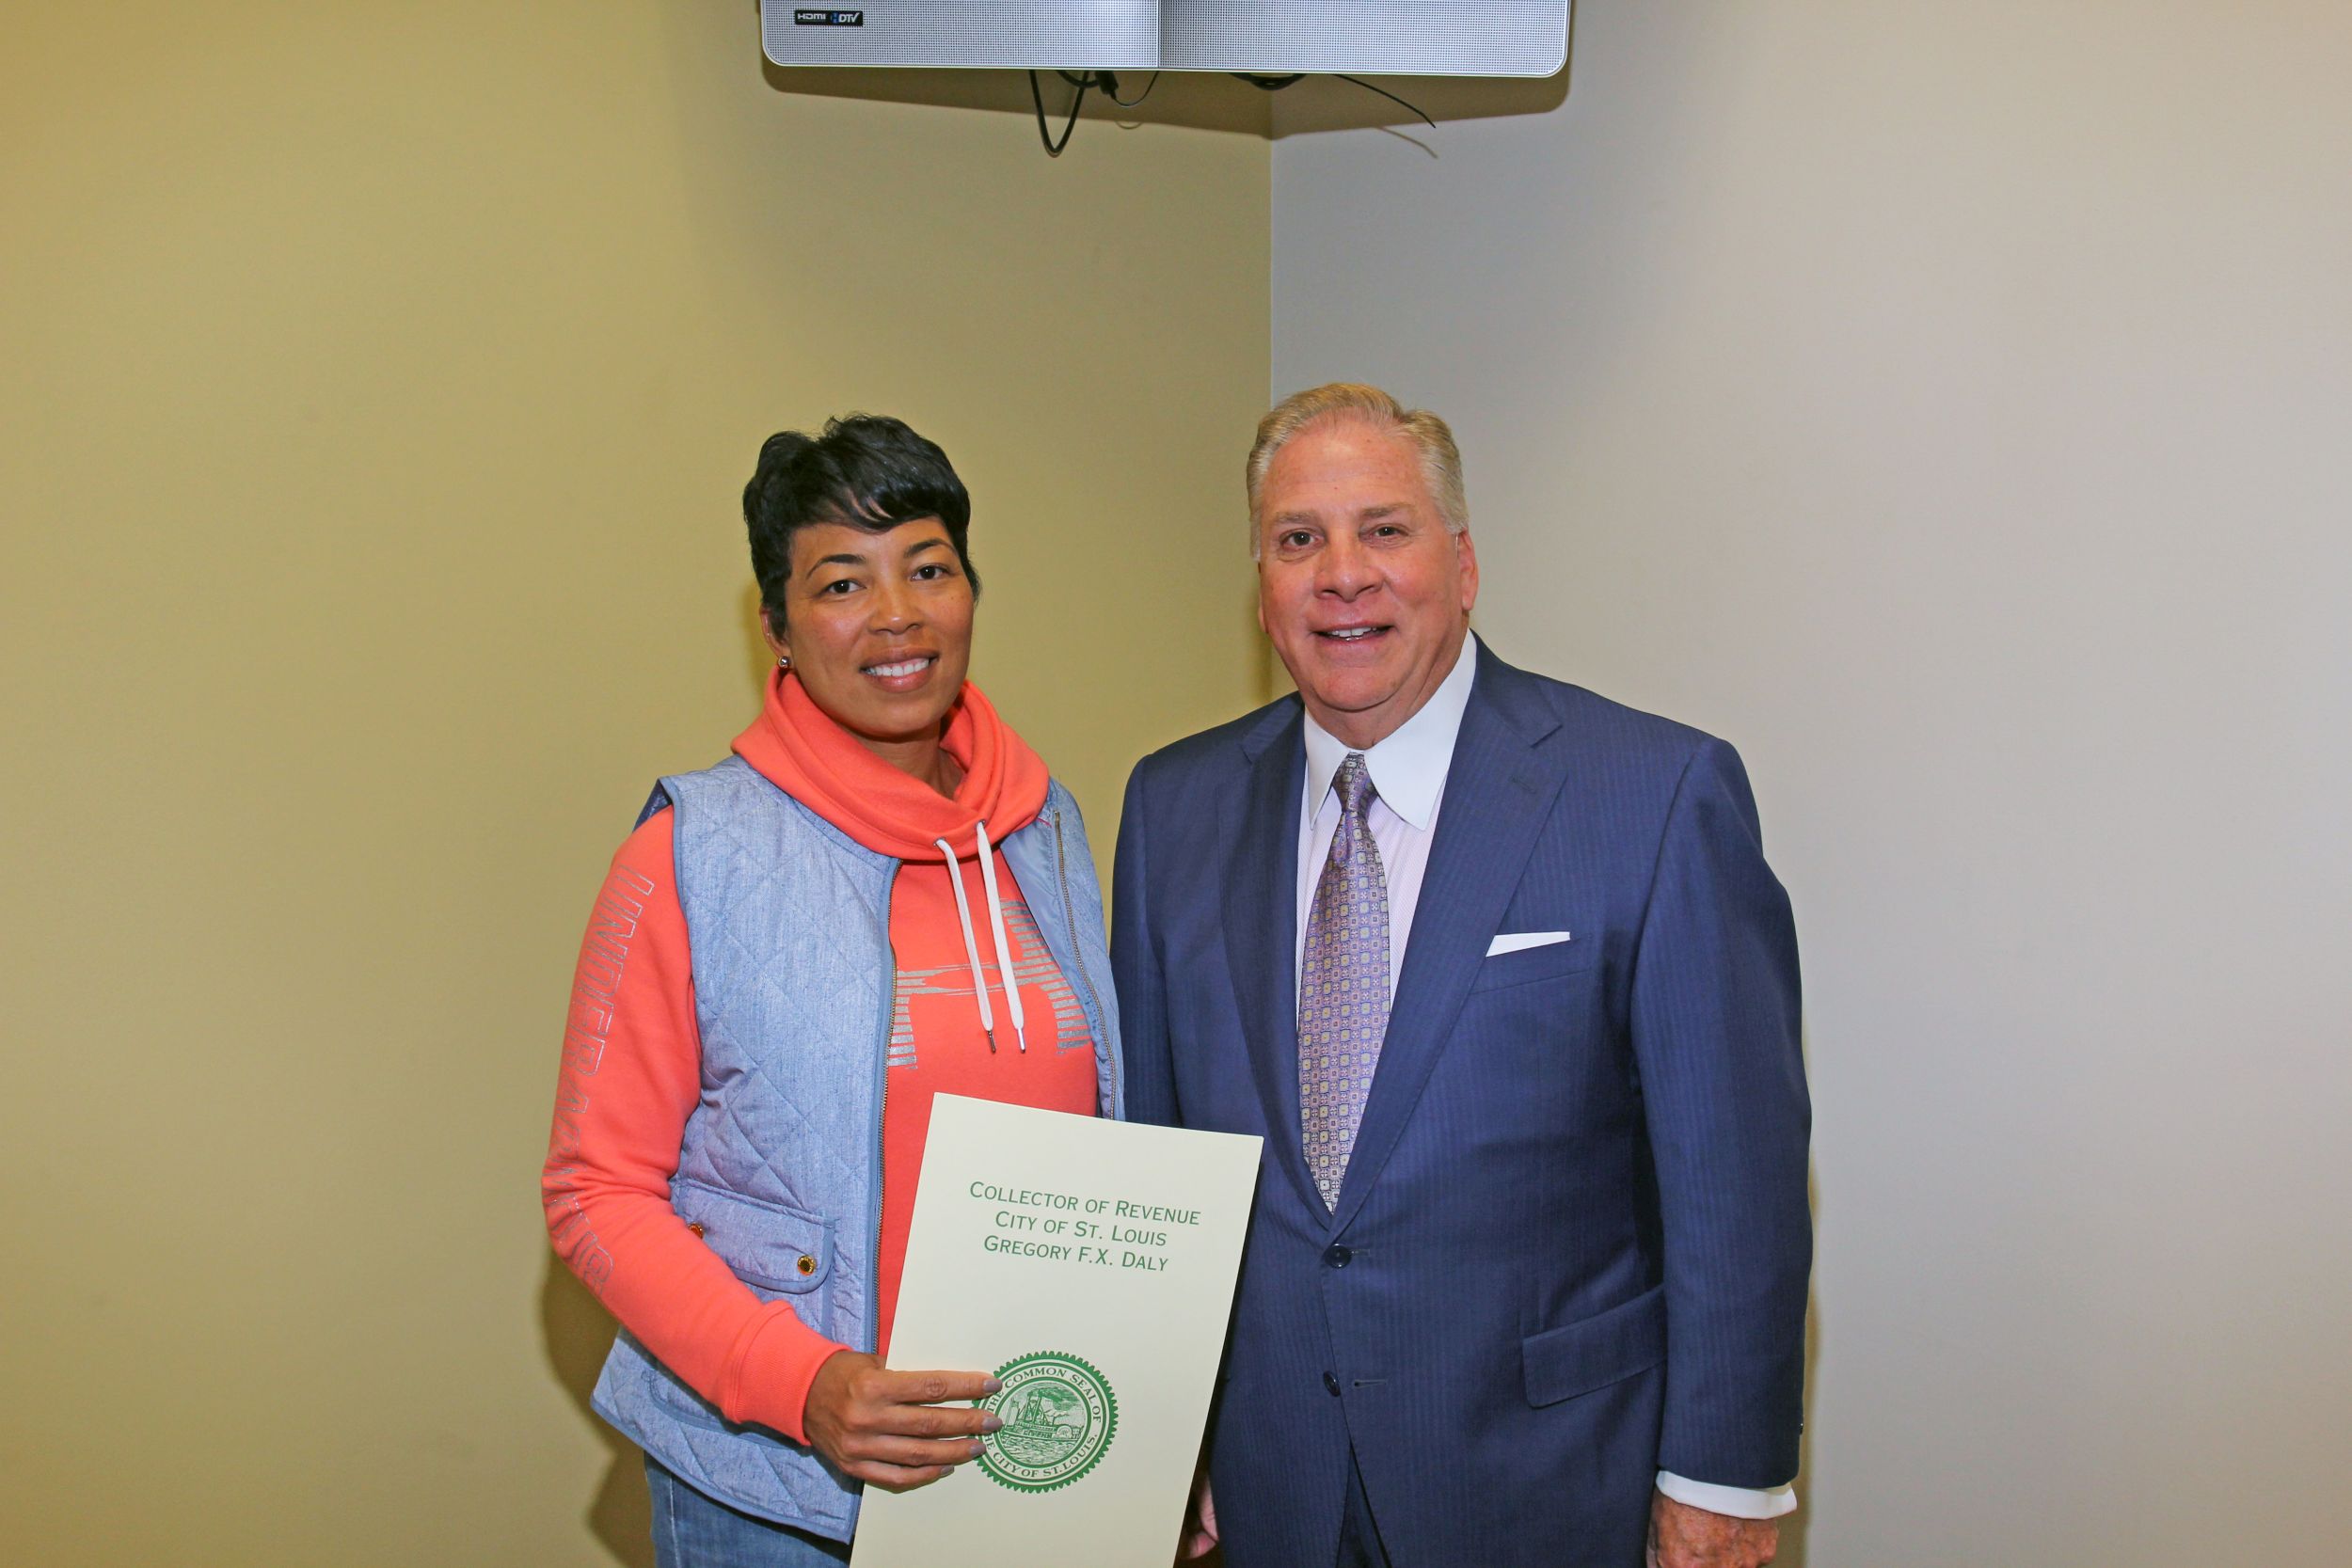 Jasmine Turnage celebrates 10 years of service with the City of St. Louis